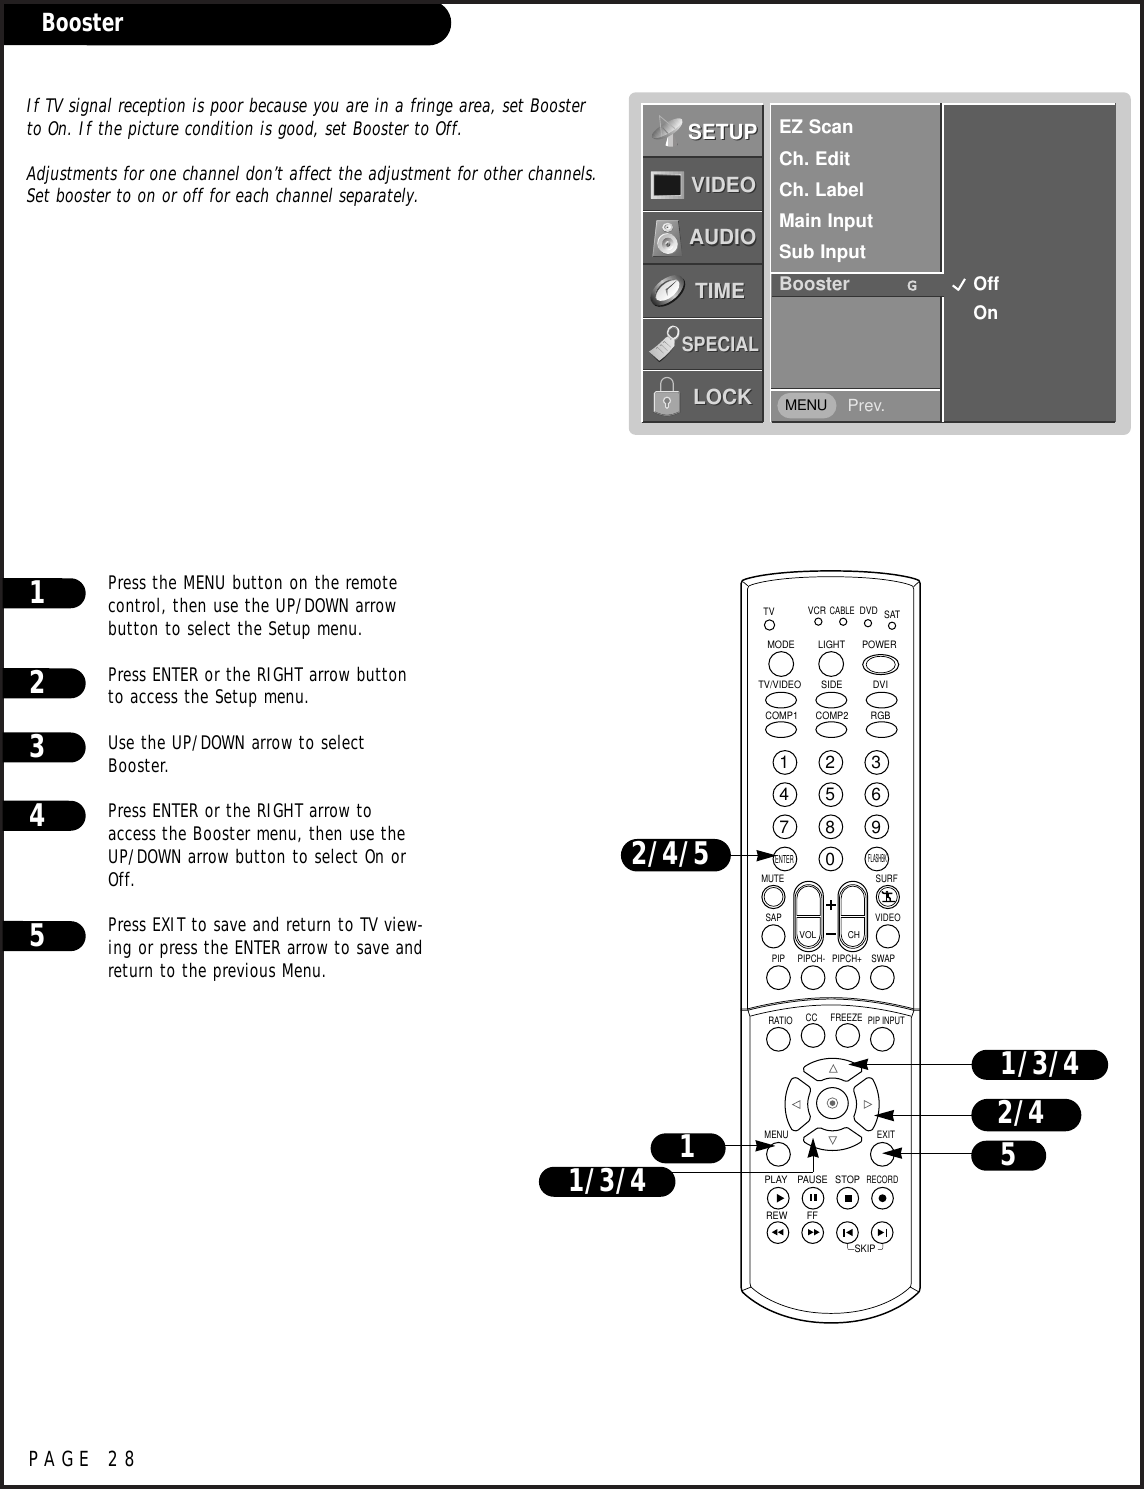 PAGE 28BoosterEZ ScanCh. EditCh. LabelMain Input Sub InputBooster GPrev.SETUPSETUPVIDEOVIDEOAUDIOAUDIOTIMETIMELOCKLOCKSPECIALSPECIALMENUOffOn12Press the MENU button on the remotecontrol, then use the UP/DOWN arrowbutton to select the Setup menu.Press ENTER or the RIGHT arrow buttonto access the Setup menu.Use the UP/DOWN arrow to selectBooster.Press ENTER or the RIGHT arrow toaccess the Booster menu, then use theUP/DOWN arrow button to select On orOff.Press EXIT to save and return to TV view-ing or press the ENTER arrow to save andreturn to the previous Menu.345If TV signal reception is poor because you are in a fringe area, set Boosterto On. If the picture condition is good, set Booster to Off.Adjustments for one channel don’t affect the adjustment for other channels.Set booster to on or off for each channel separately.1234567890TVMODE LIGHT POWER   TV/VIDEO DVIRGBVCRCABLEDVD SATMUTESWAPPIPCH- PIPCH+PIPRATIORECORDSTOPPAUSEREWPLAYFFMENU EXITCC FREEZEPIP INPUTVOL CHSURFSAP VIDEOCOMP2COMP1SIDESKIPENTERFLASHBK2/4/52/4511/3/41/3/4